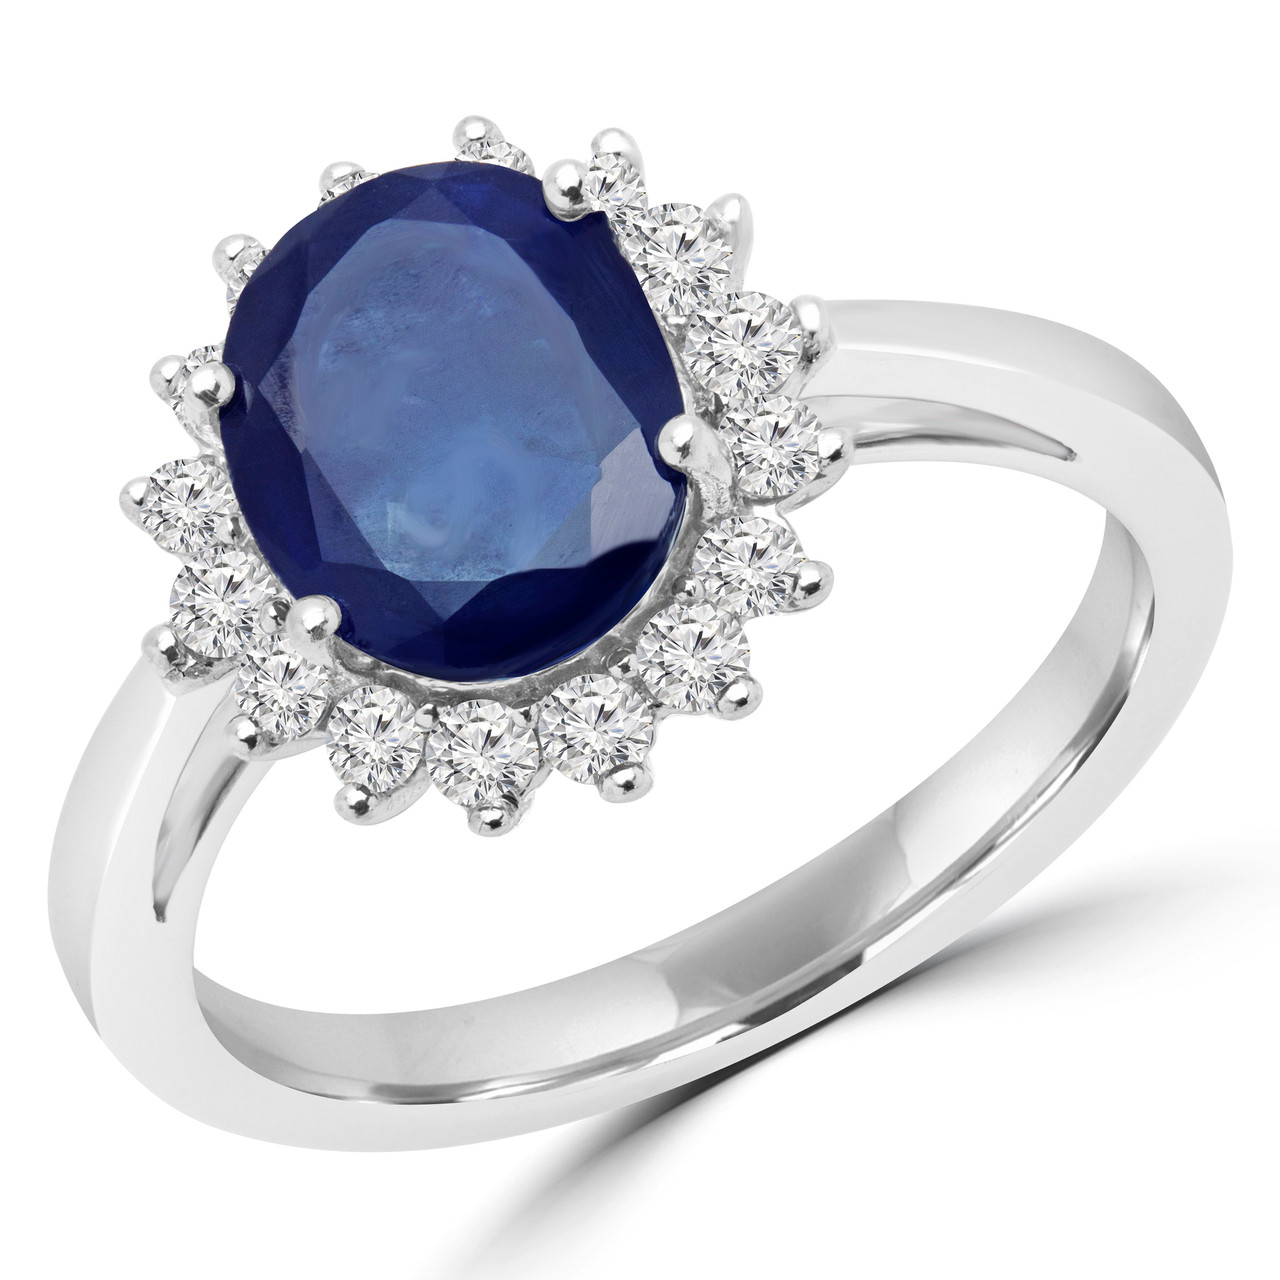 Oval Blue Sapphire Cocktail Ring 14K White Gold - #HDR6920 - Bijoux Majesty